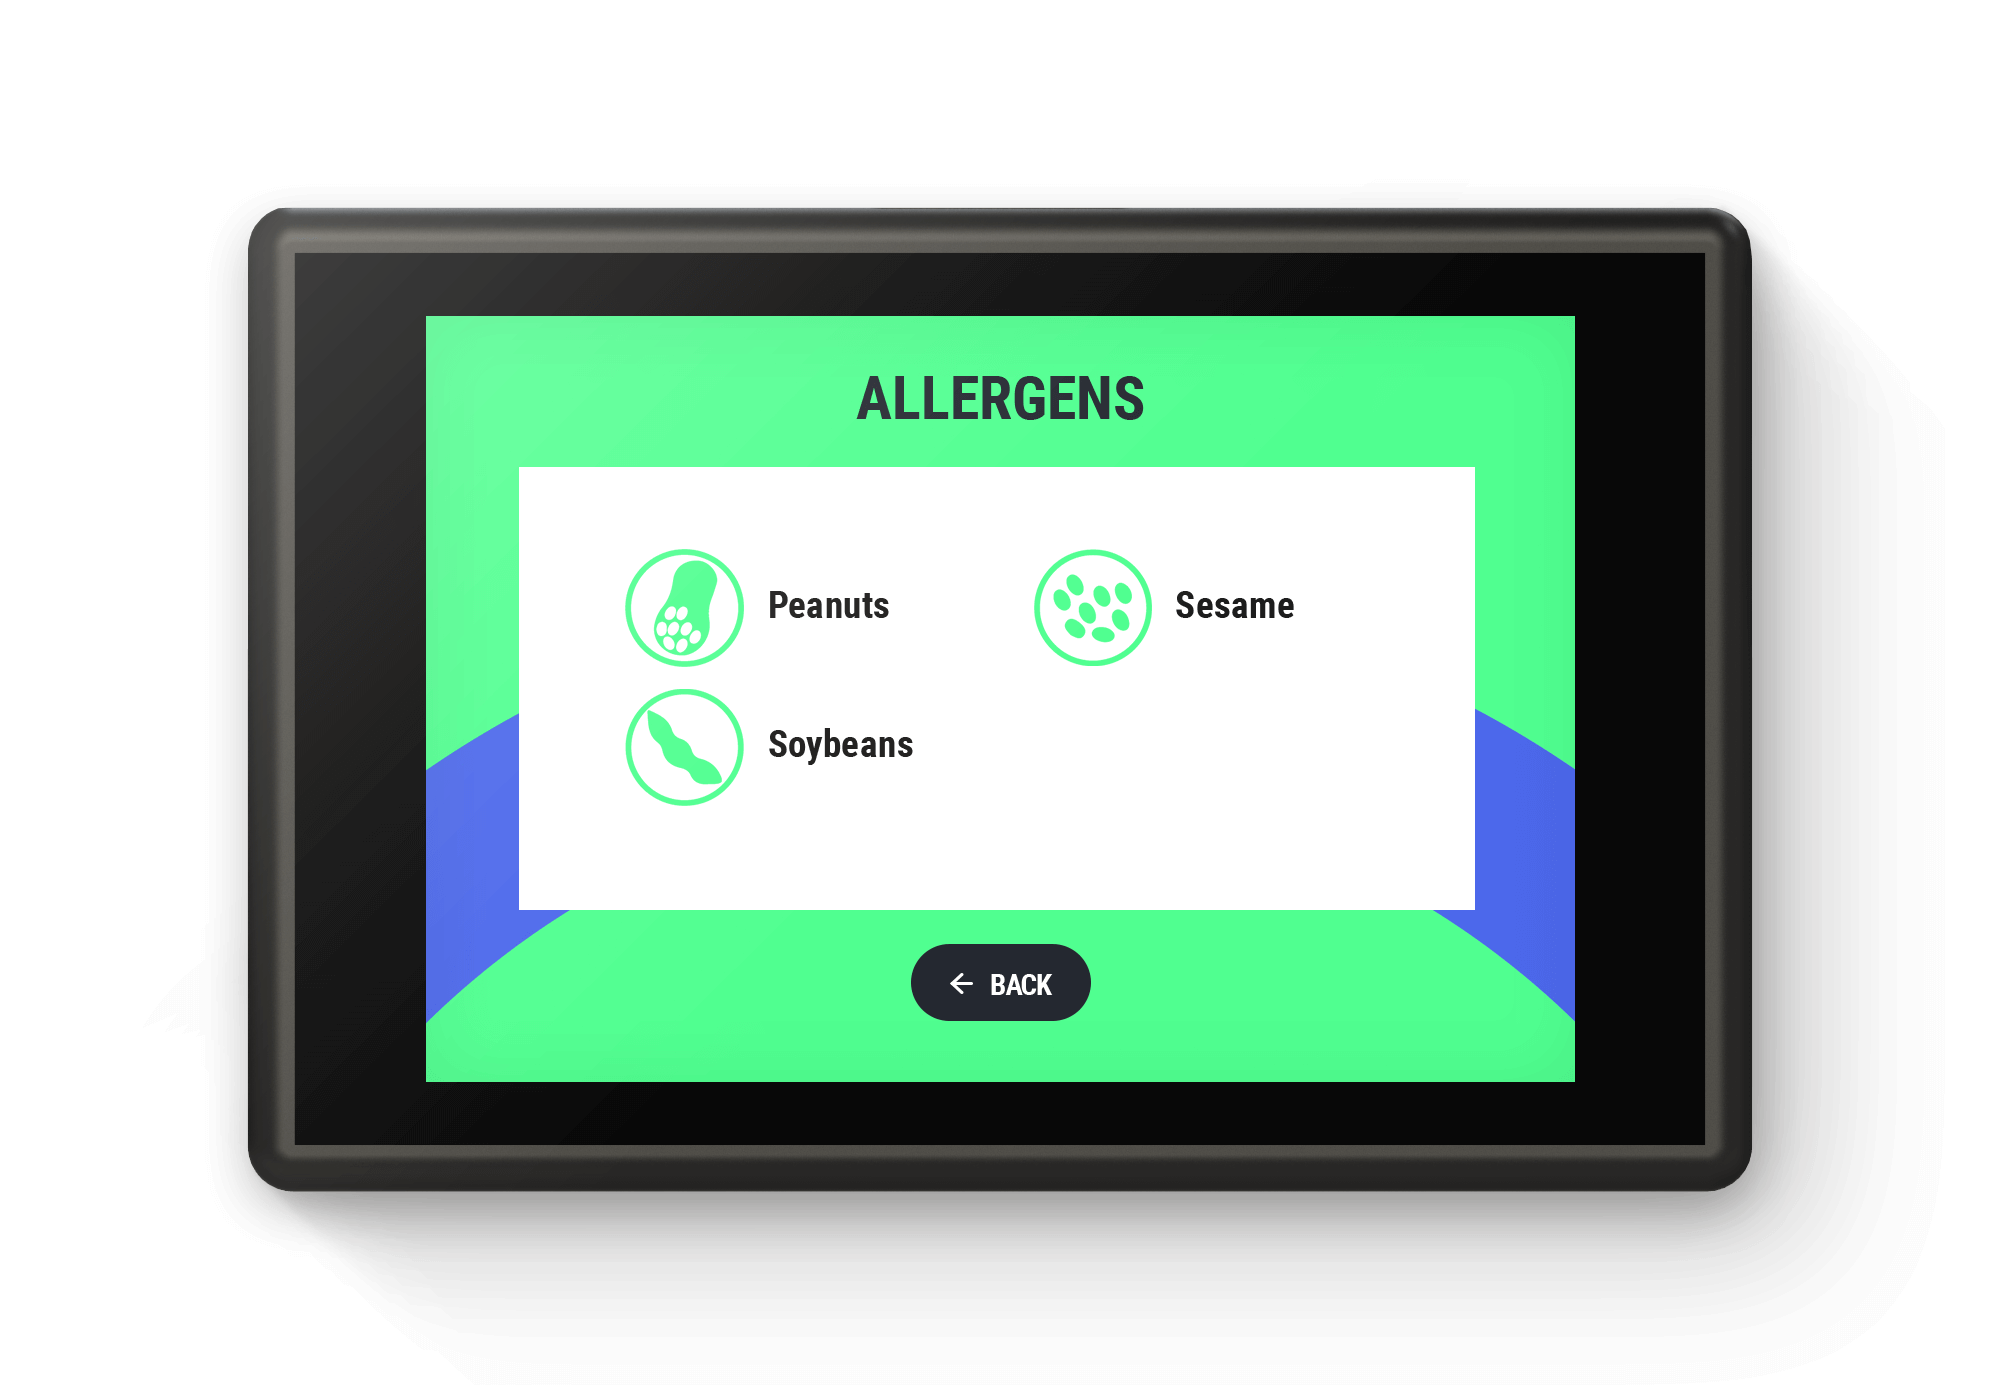 SIMPLE WAY TO INDICATE ALLERGENS